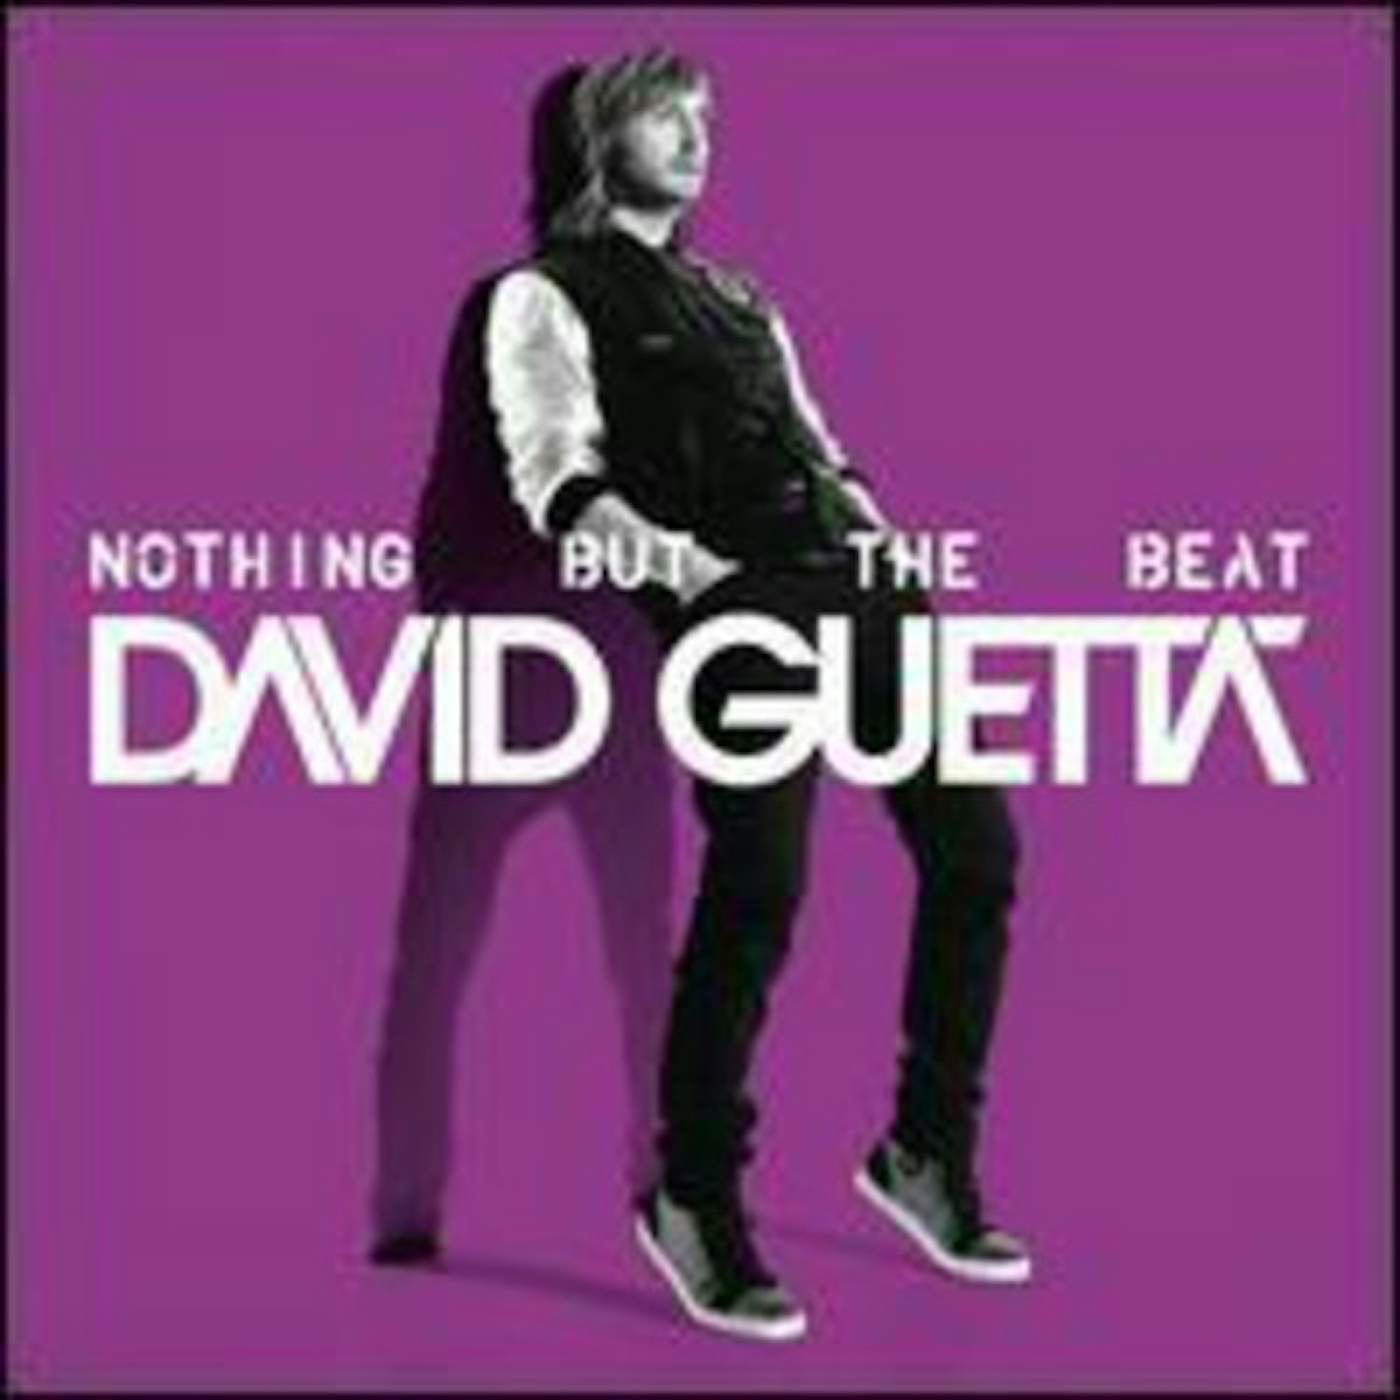 David Guetta NOTHING BUT THE BEAT CD